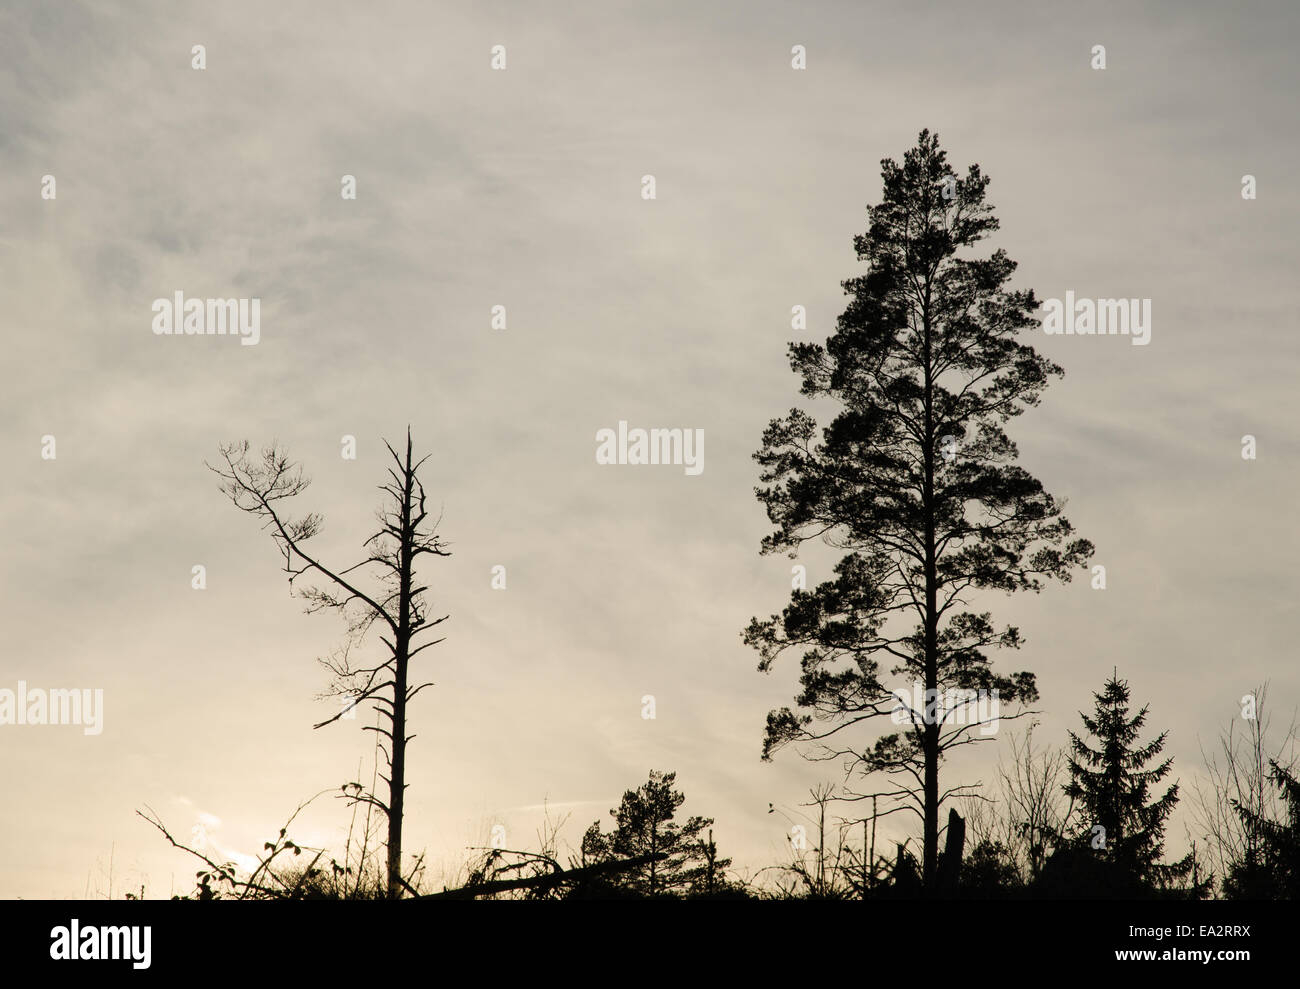 Silhouettes of on dead pine tree and one tall living pine tree Stock Photo